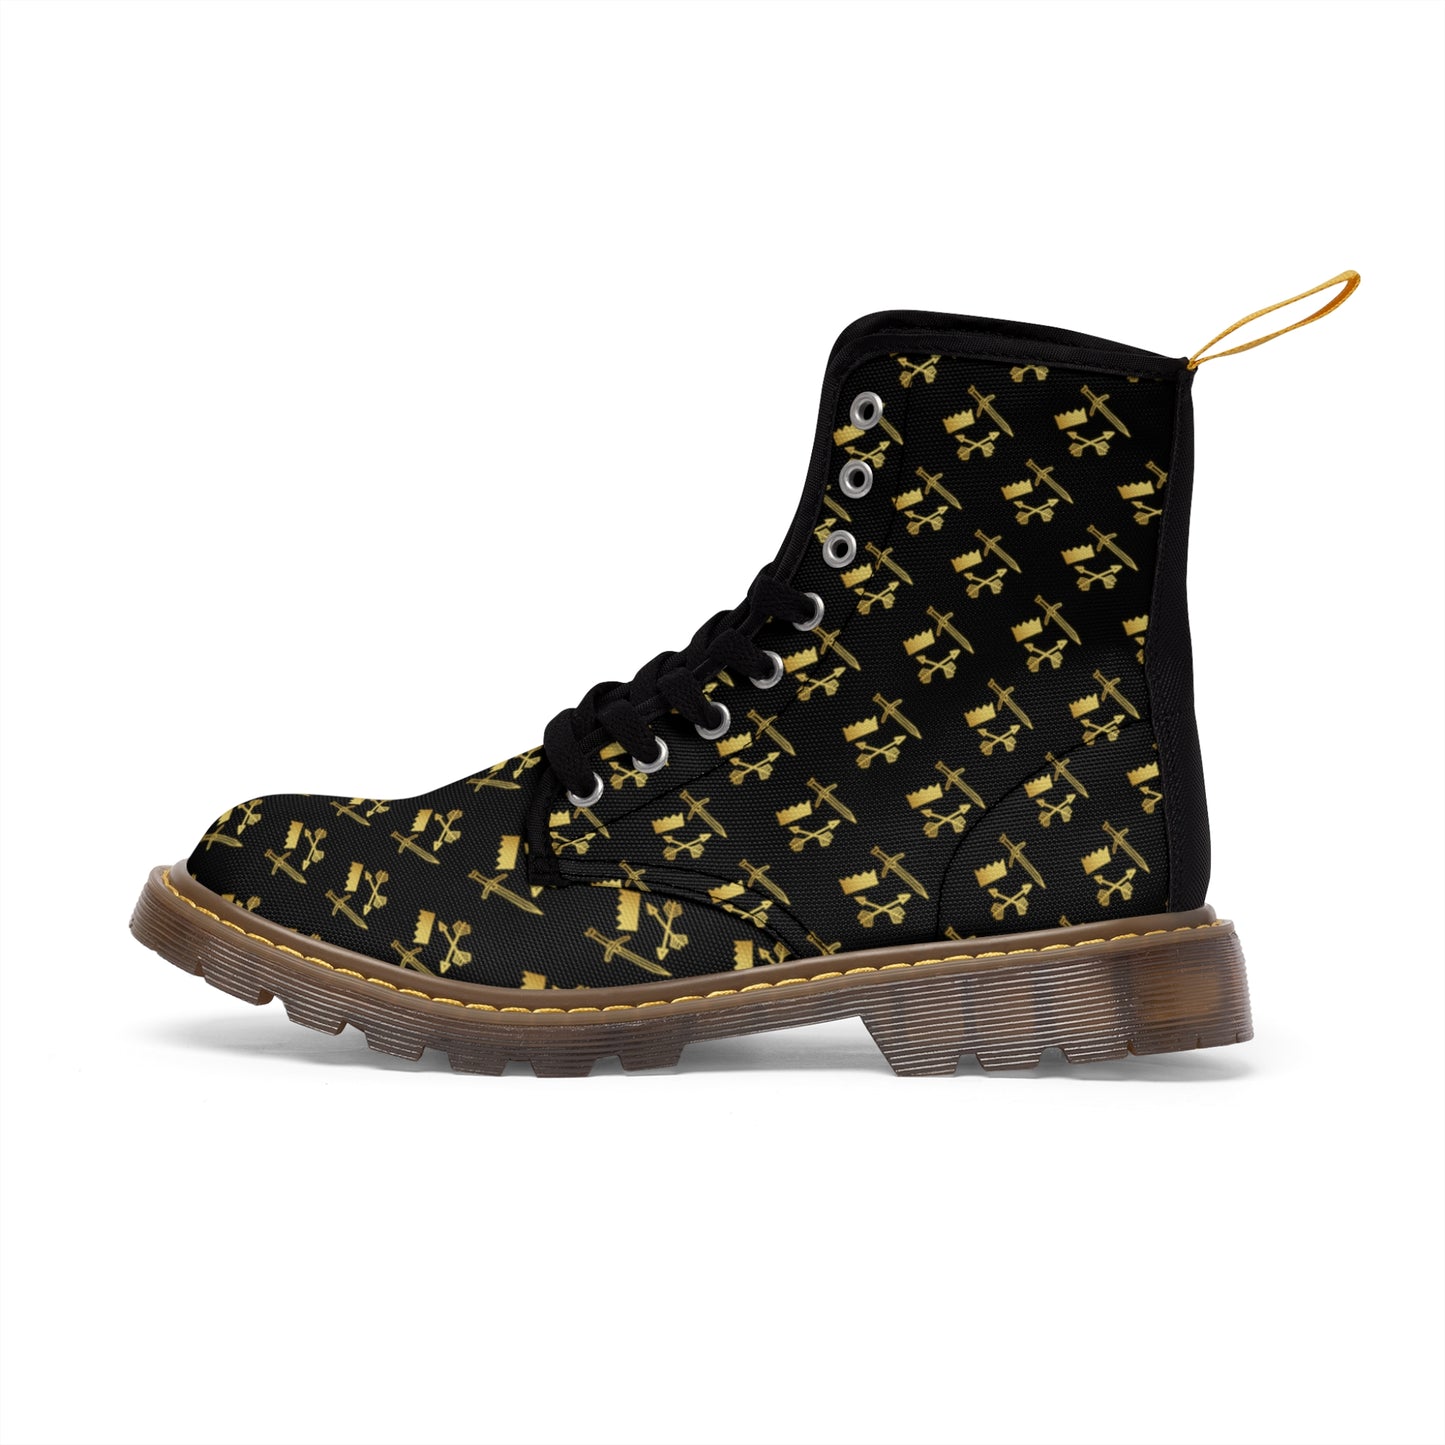 Men's - Gold and Bold Warrior - Martin Boots